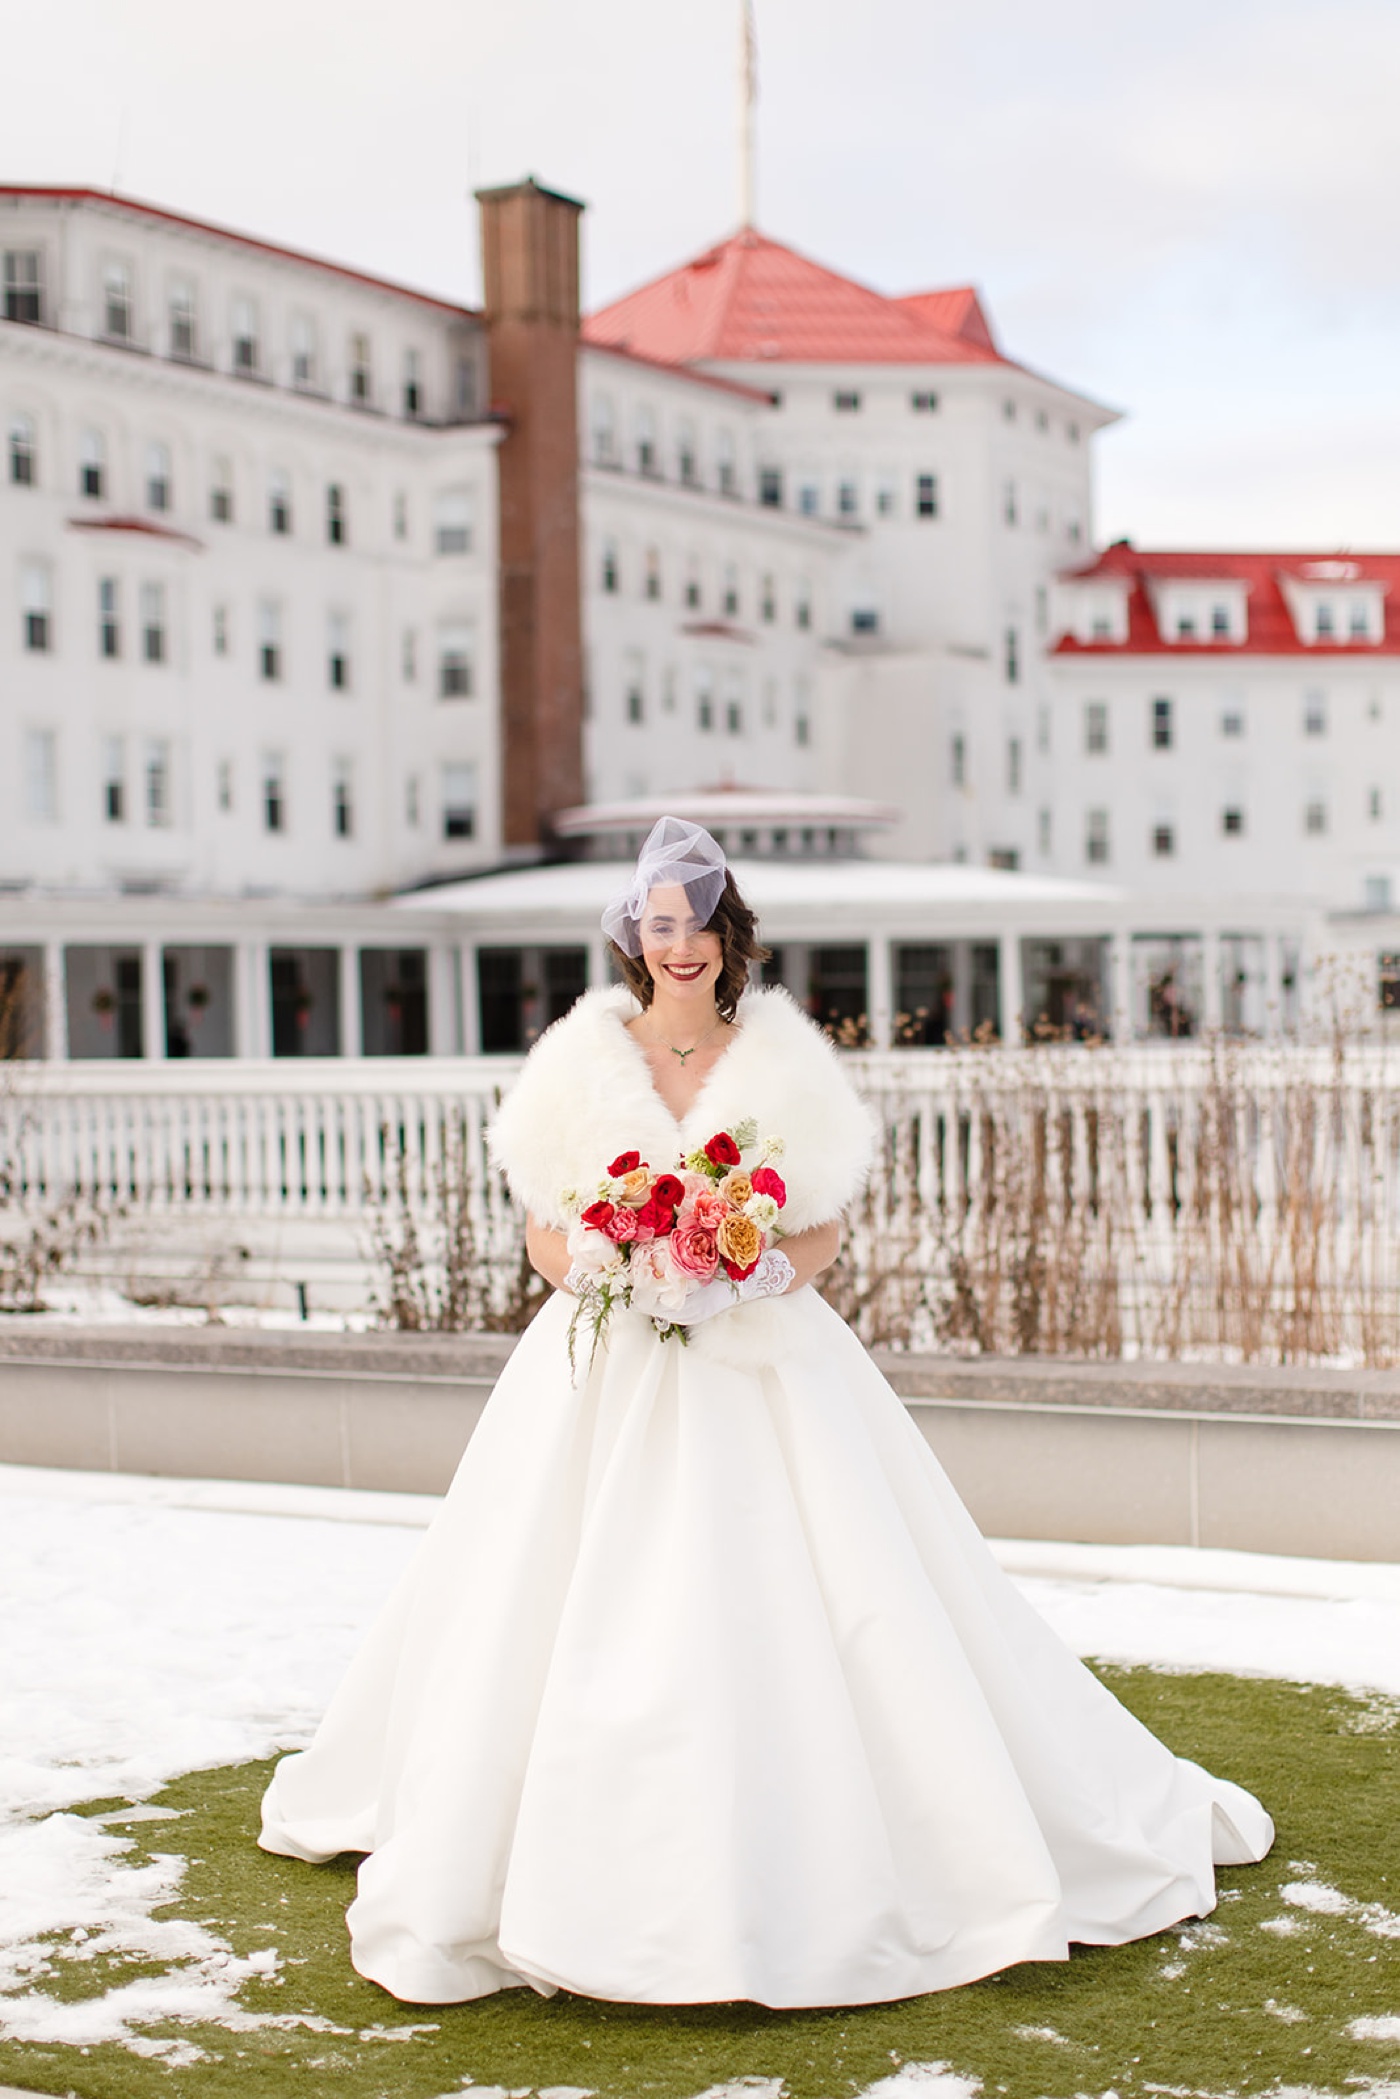 Bride in a satin ballgown and a birdcage veil with a red lip